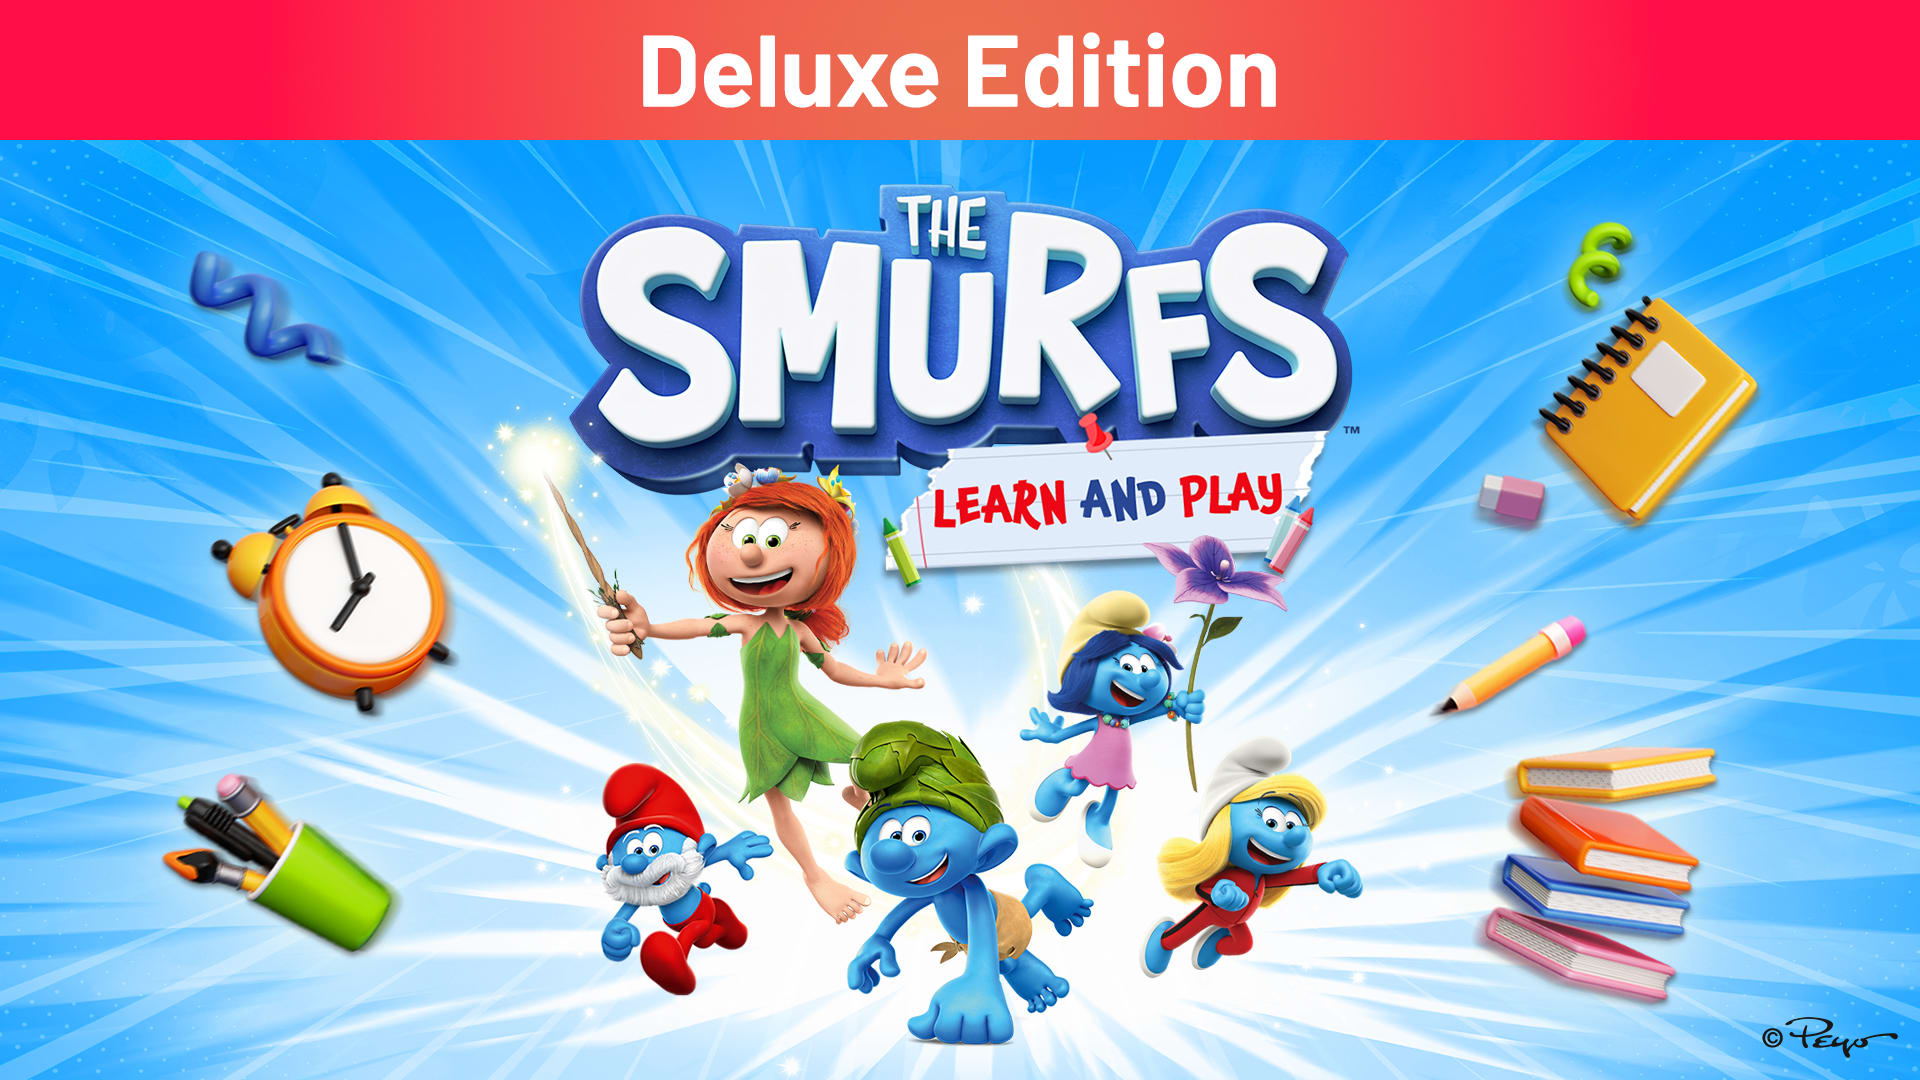 The Smurfs: Learn and Play Deluxe Edition